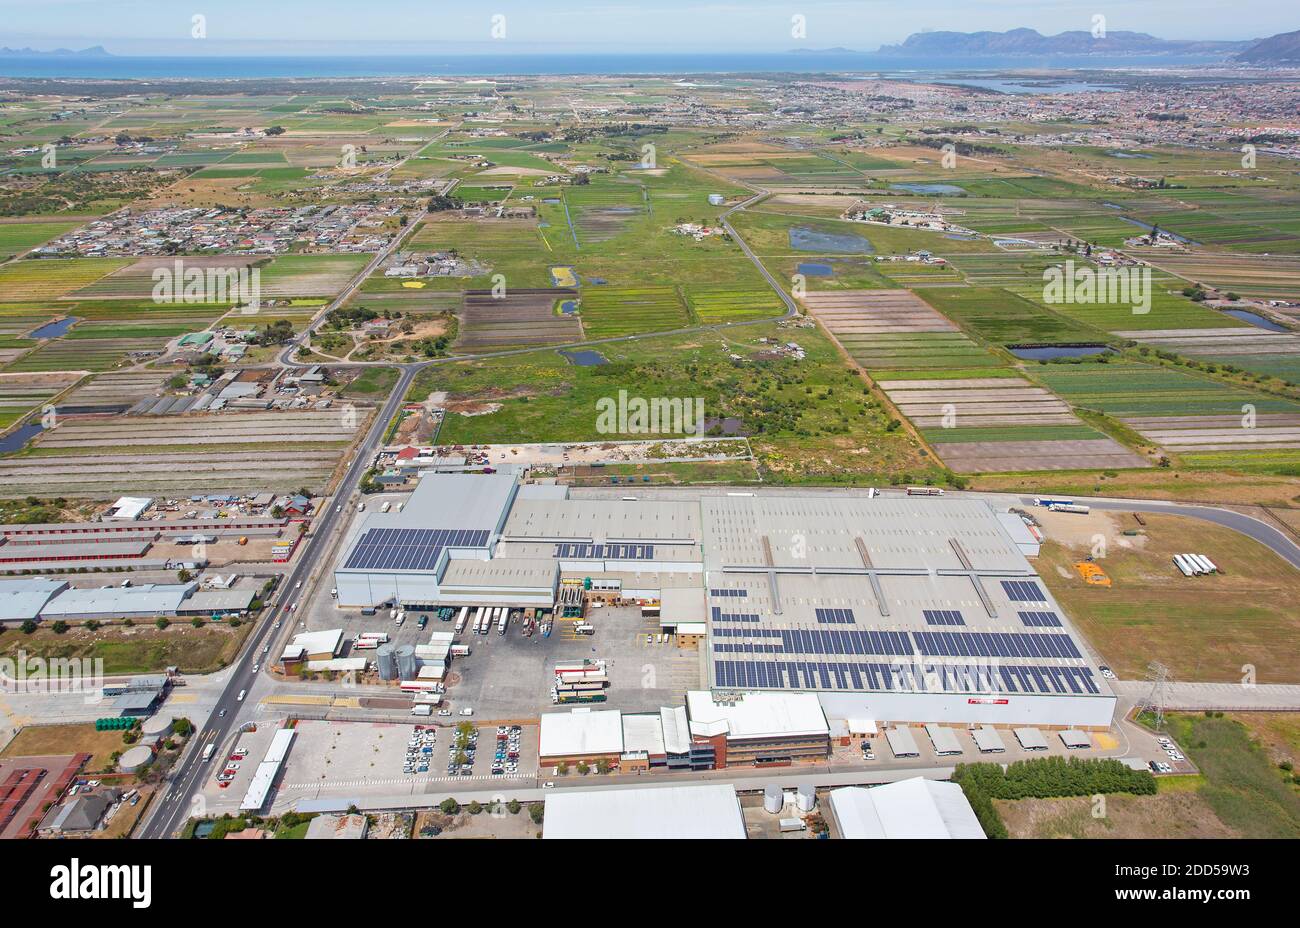 Cape Town, Western Cape / South Africa - 10/26/2020: Aerial photo of Spar Distribution Centre with False Bay in the background Stock Photo